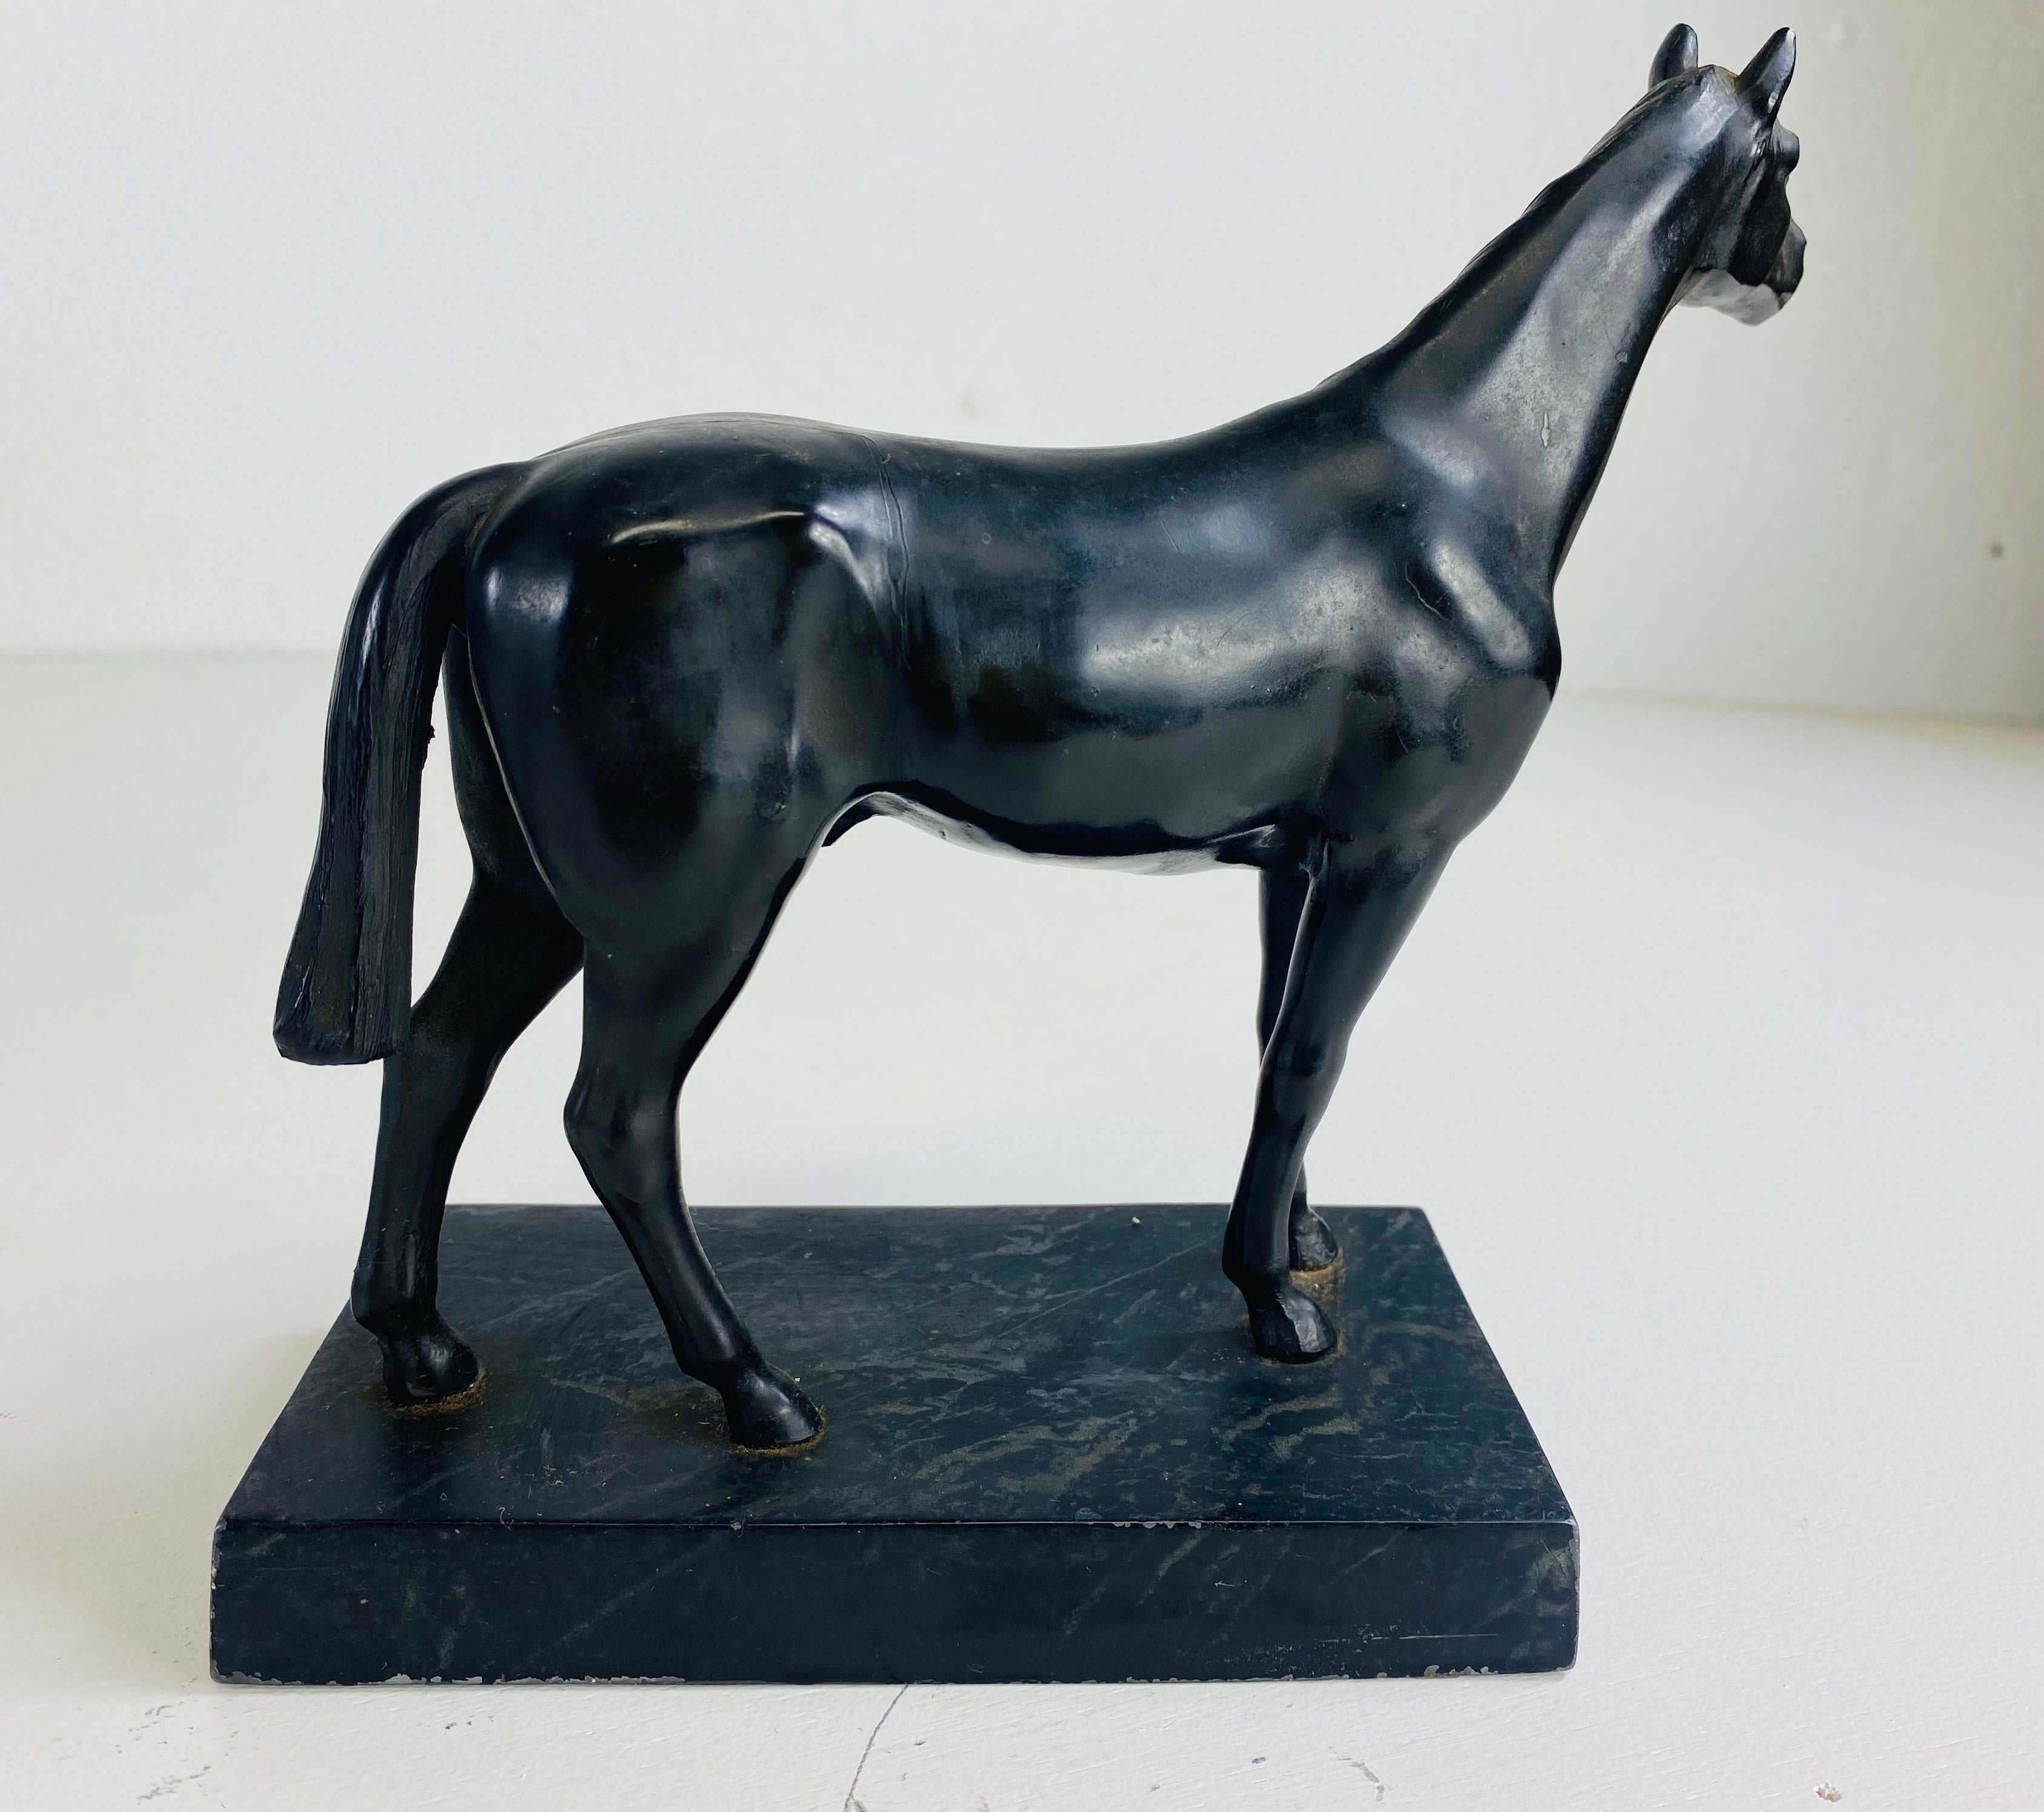 American Classical Early 20th century bronze equestrian horse sculpture. For Sale